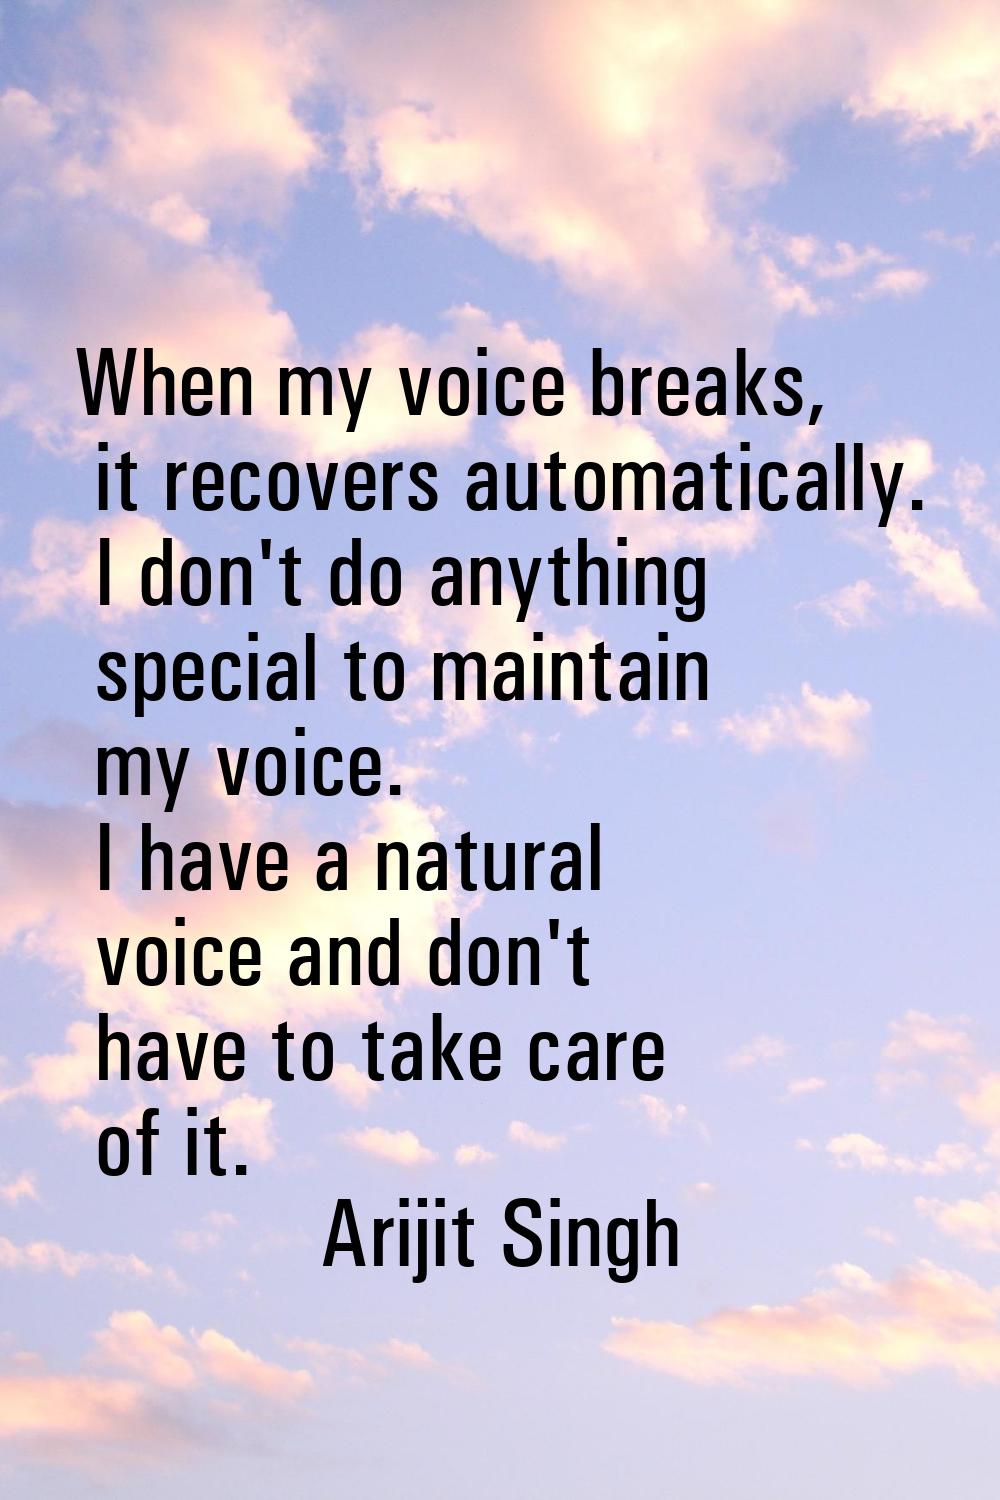 When my voice breaks, it recovers automatically. I don't do anything special to maintain my voice. 